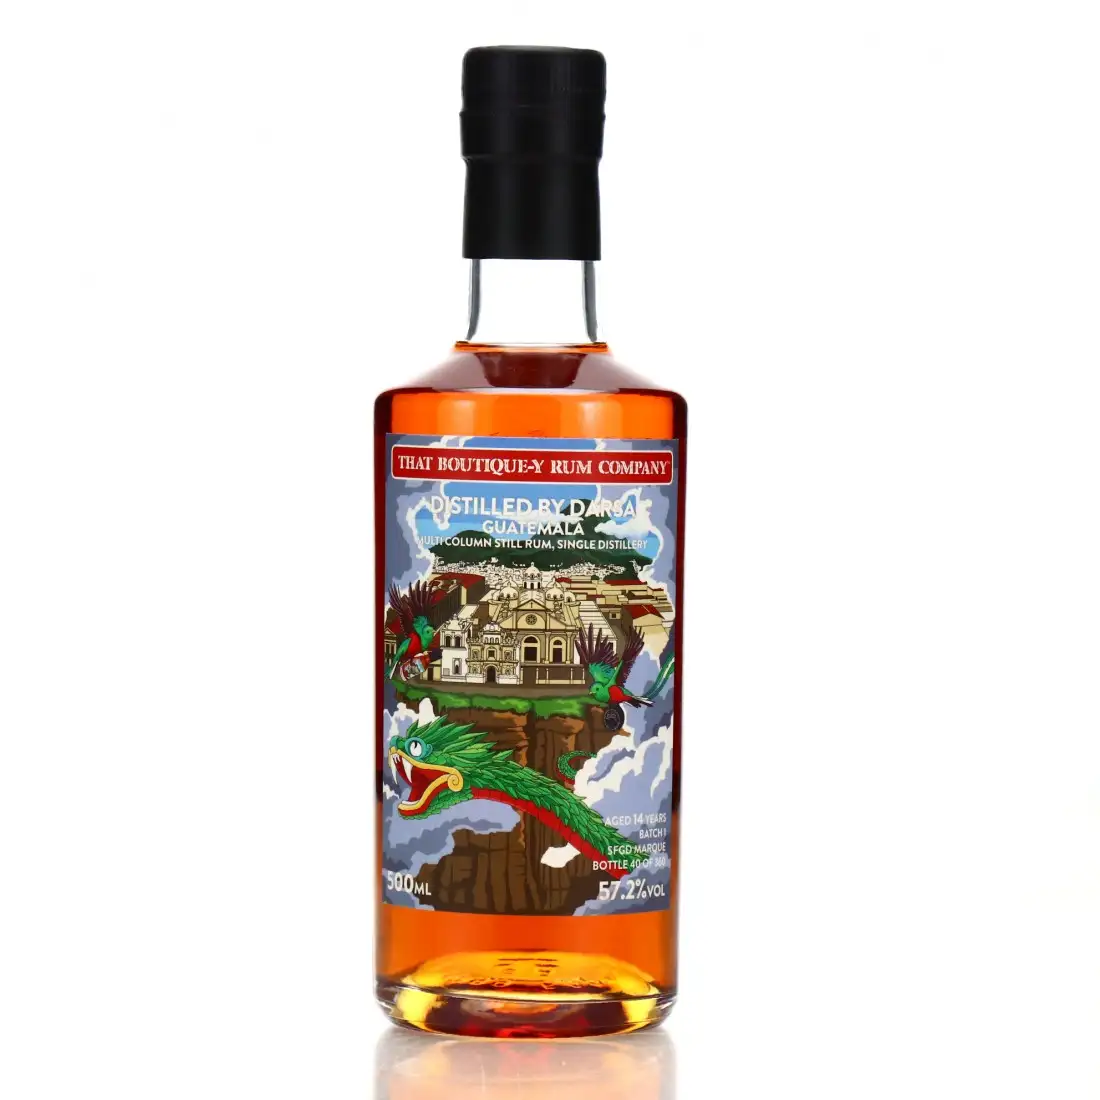 Image of the front of the bottle of the rum Distilled by Darsa SFGD